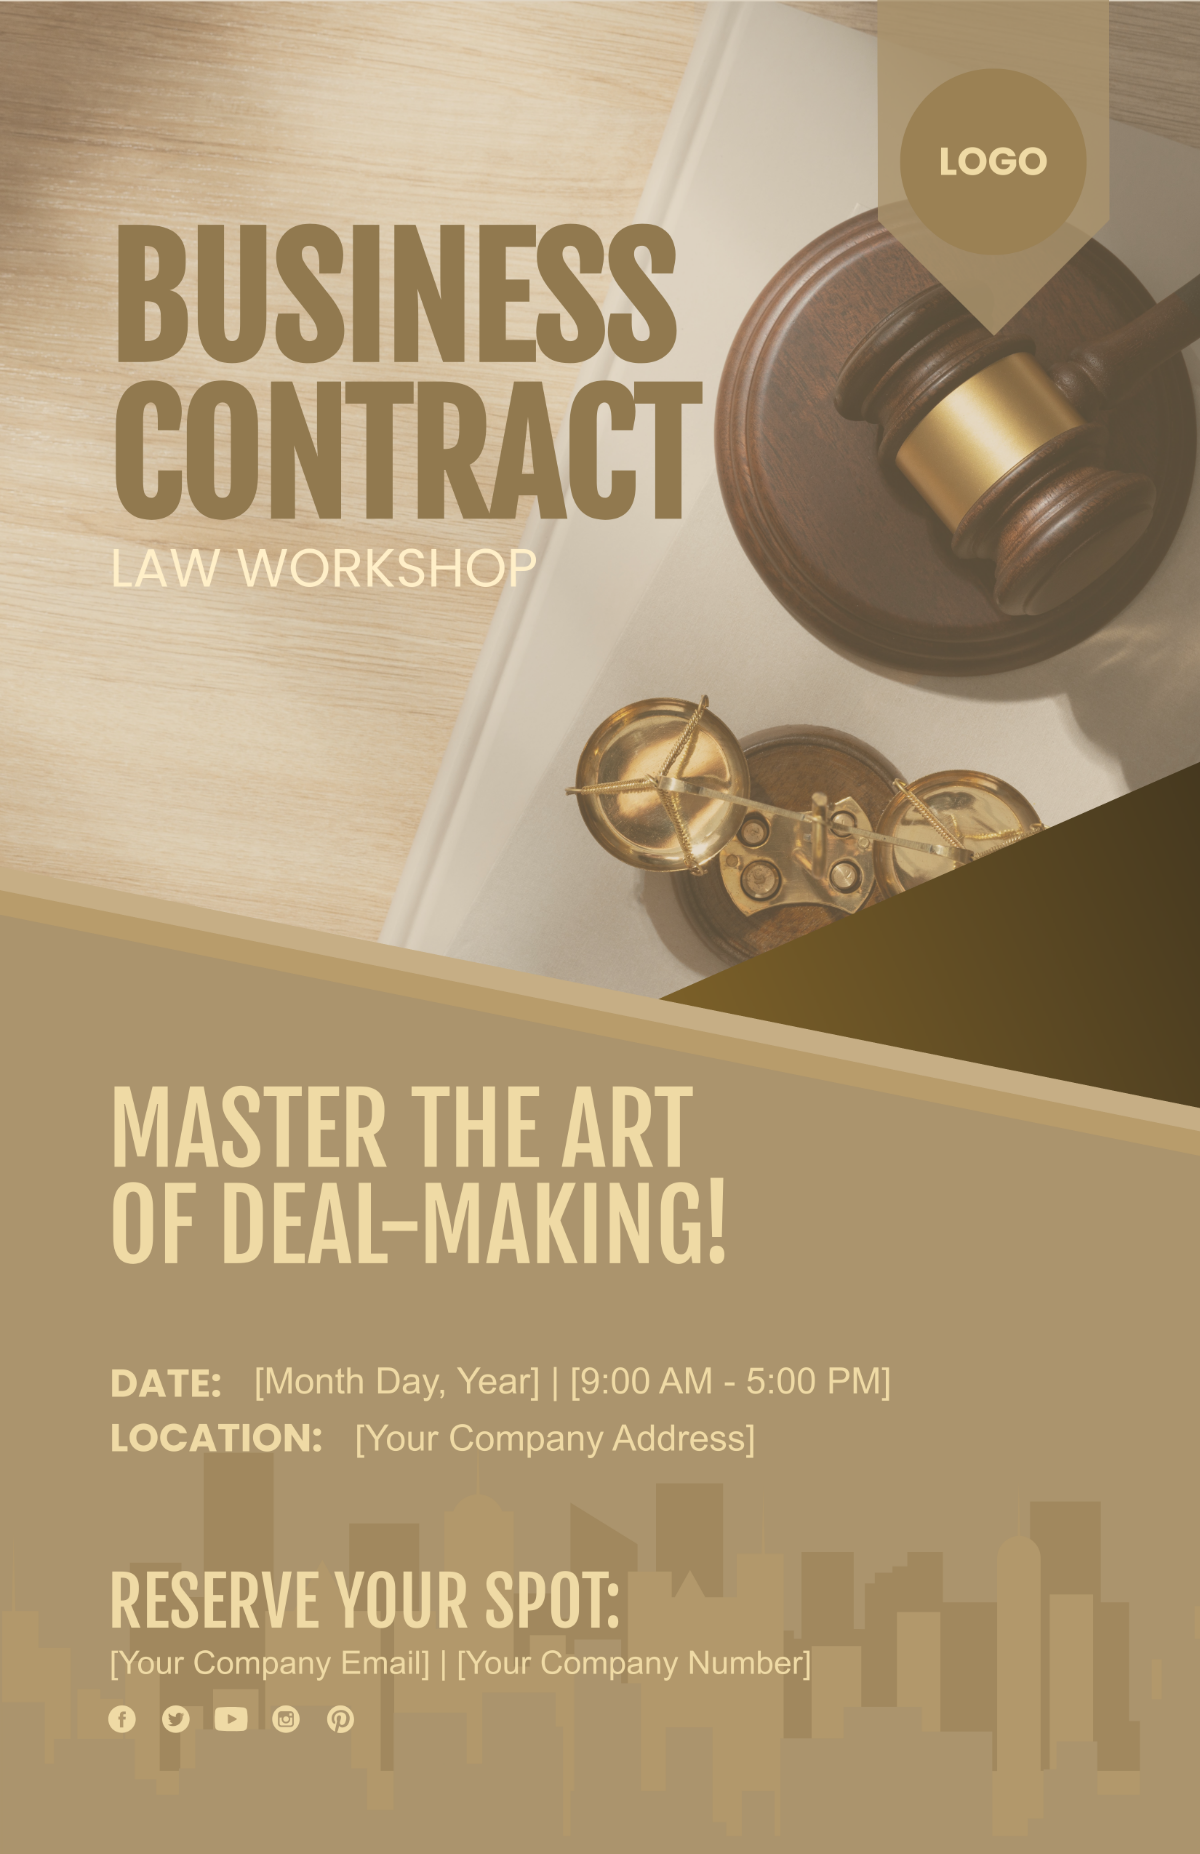 Free Business Contract Law Workshop Poster Template